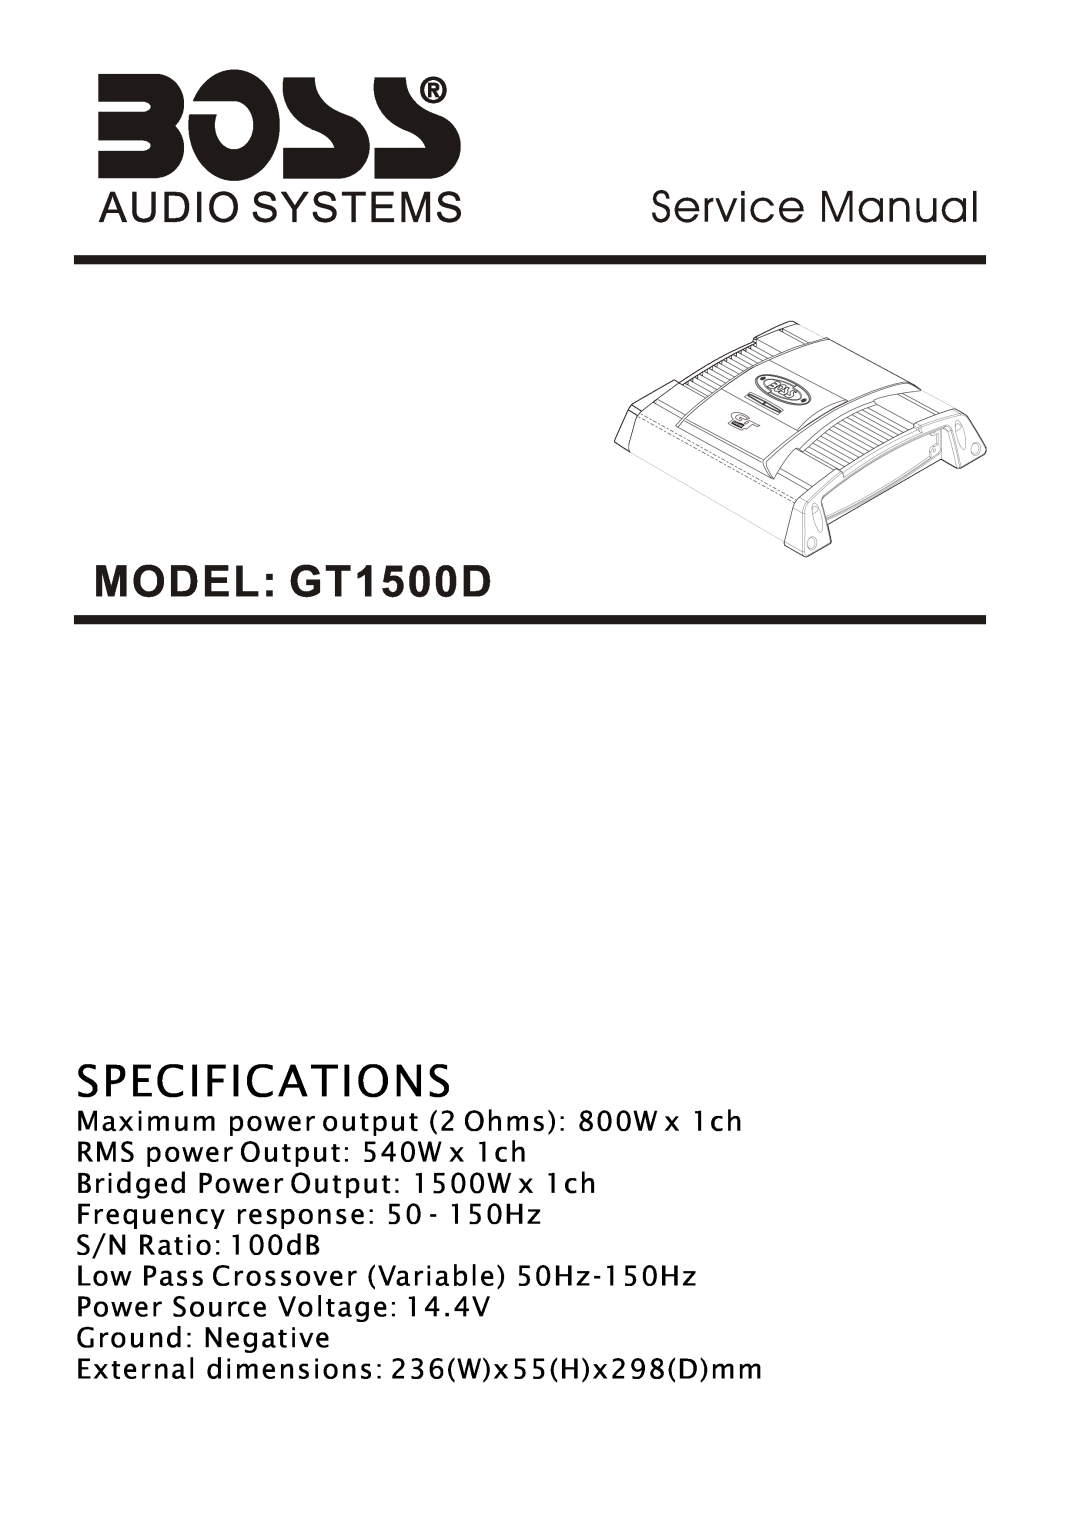 Boss Audio Systems service manual Service Manual, MODEL GT1500D, Specifications, S/N Ratio 100dB 